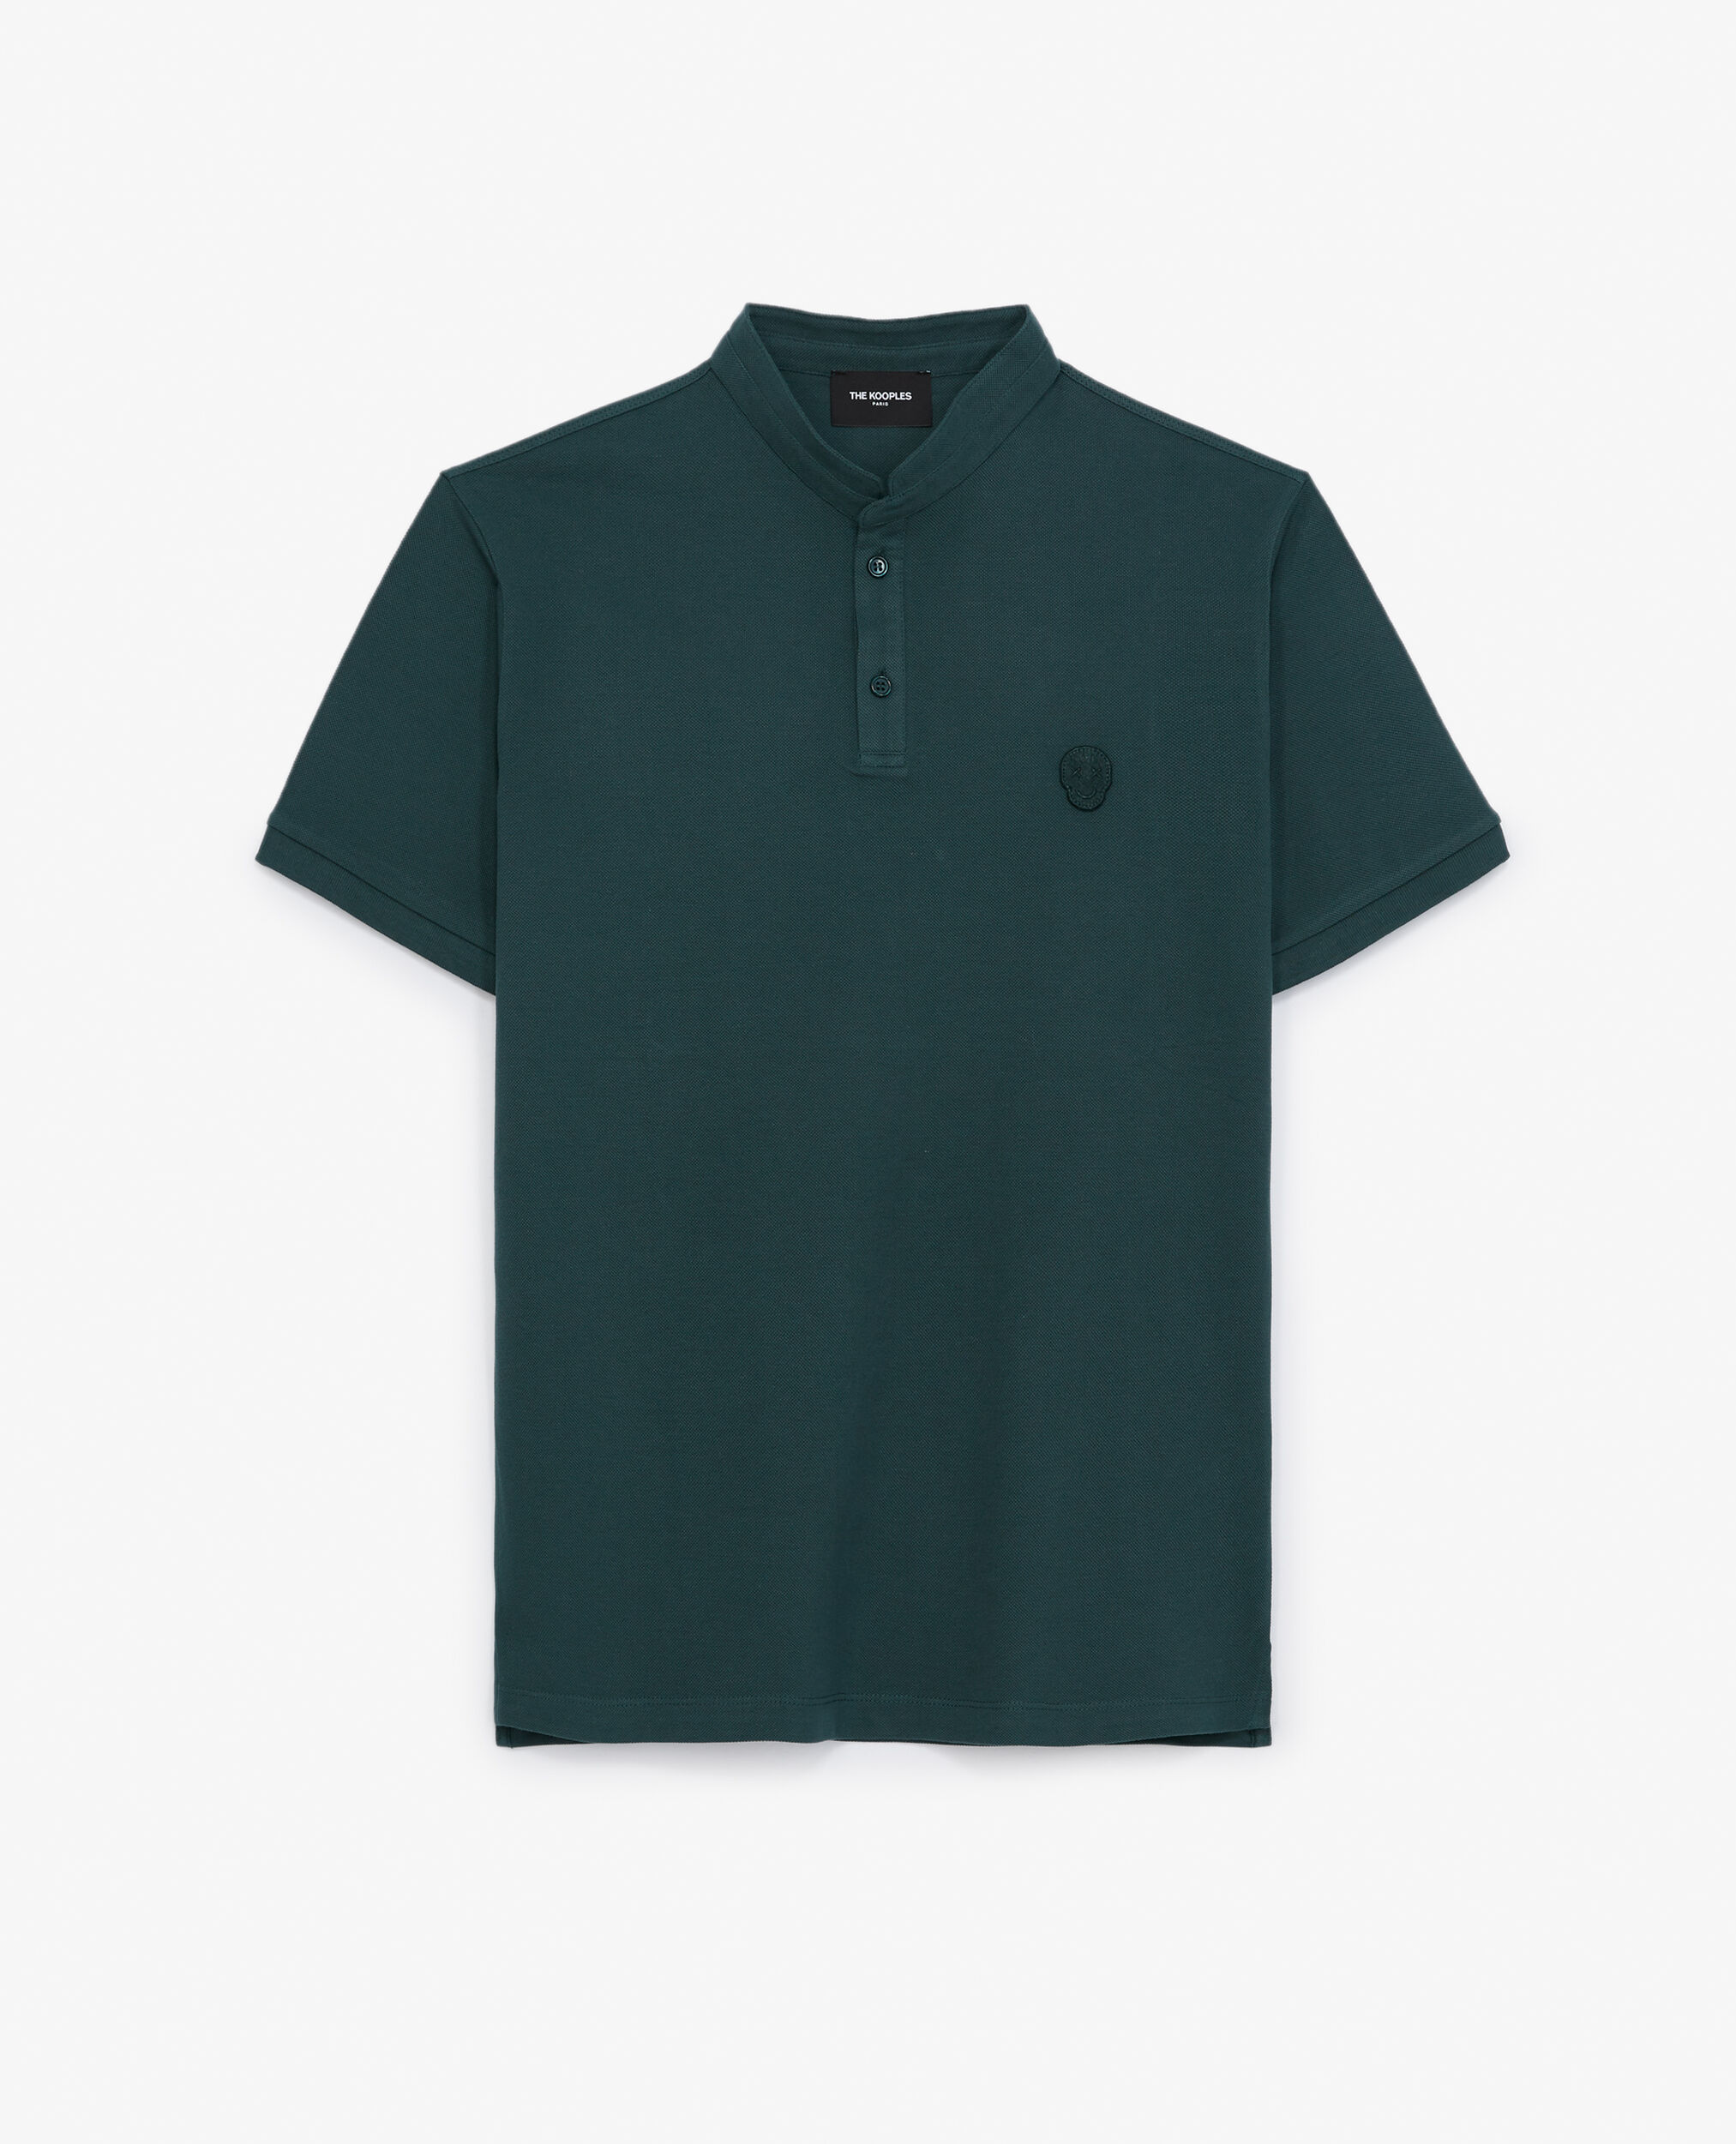 Camisa polo verde oscuro cuello Mao insignia, DARK GREEN, hi-res image number null